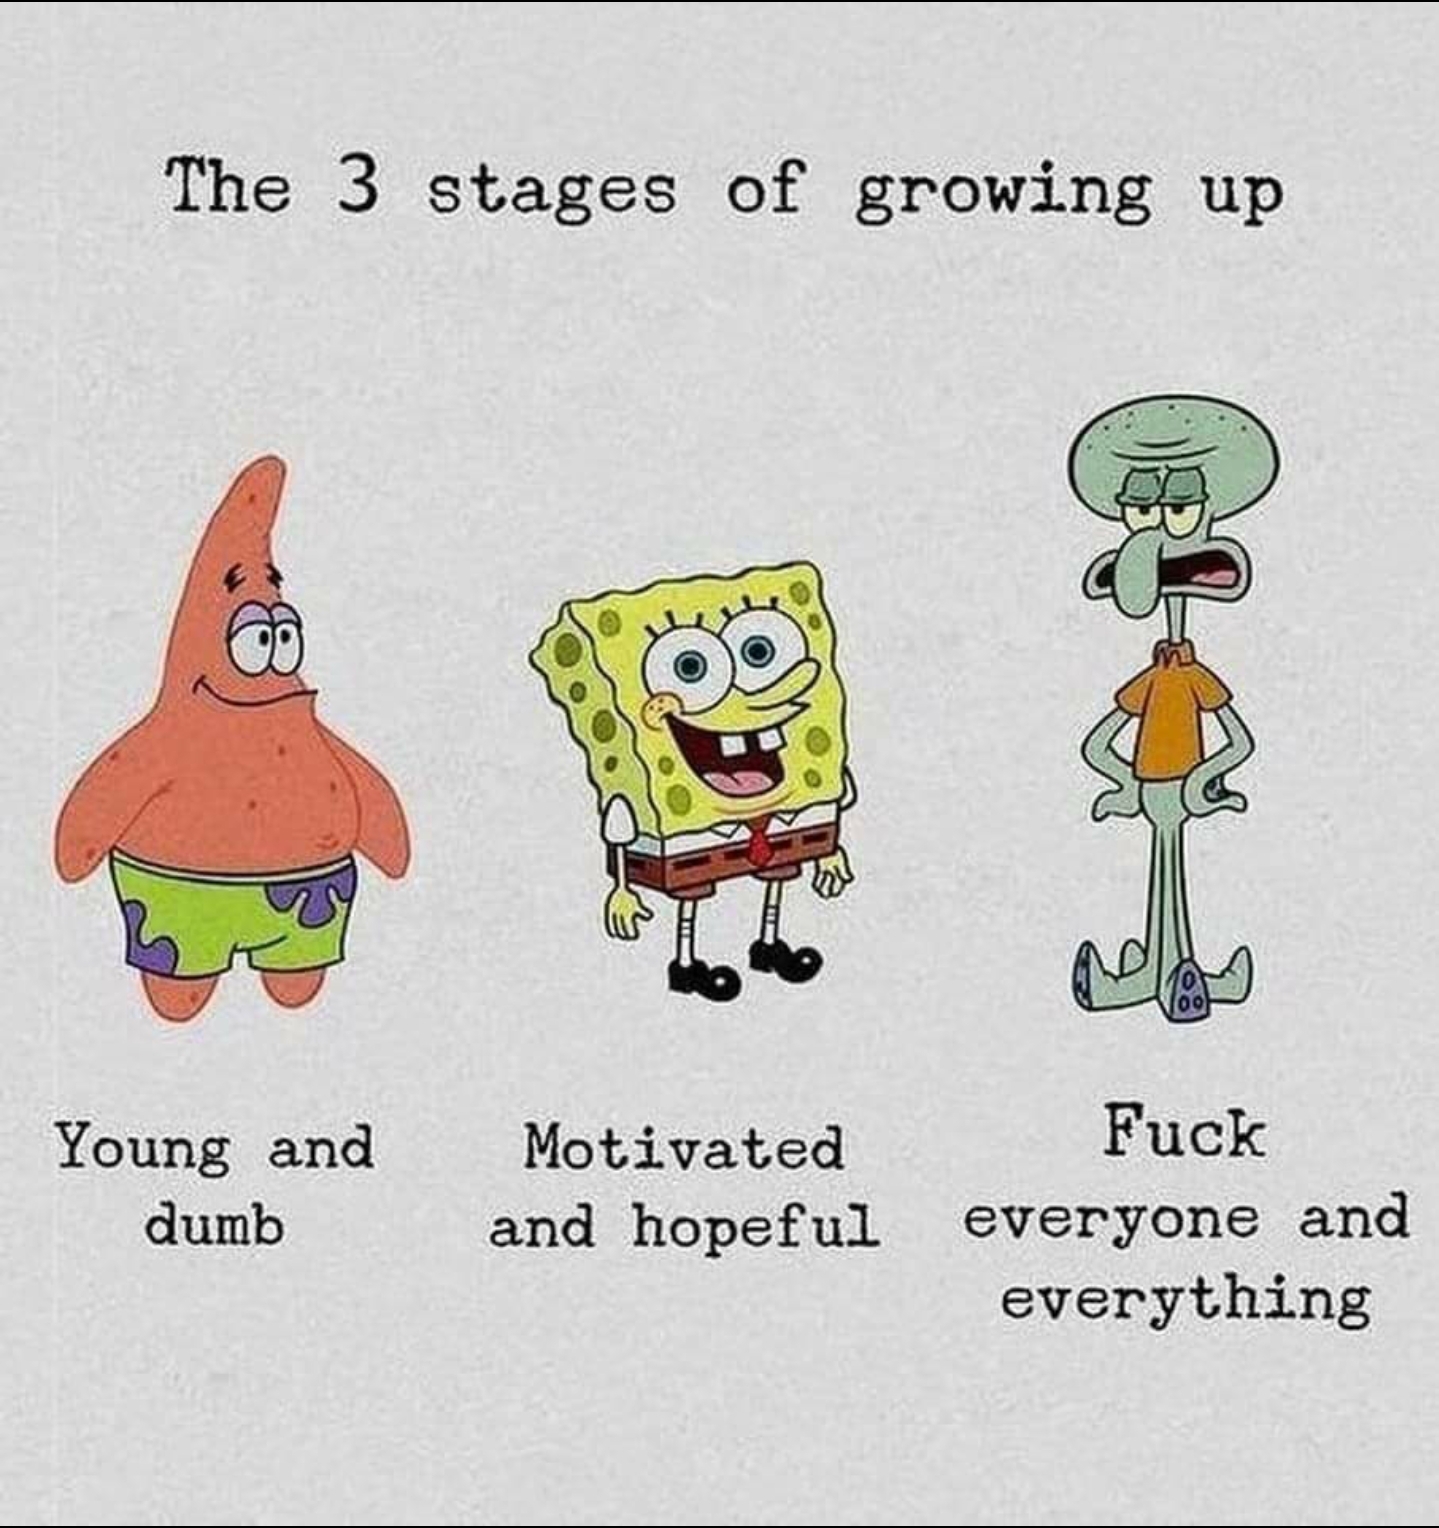 life in a nutshell - The 3 stages of growing up 00 Young and dumb Motivated and hopeful Fuck everyone and everything